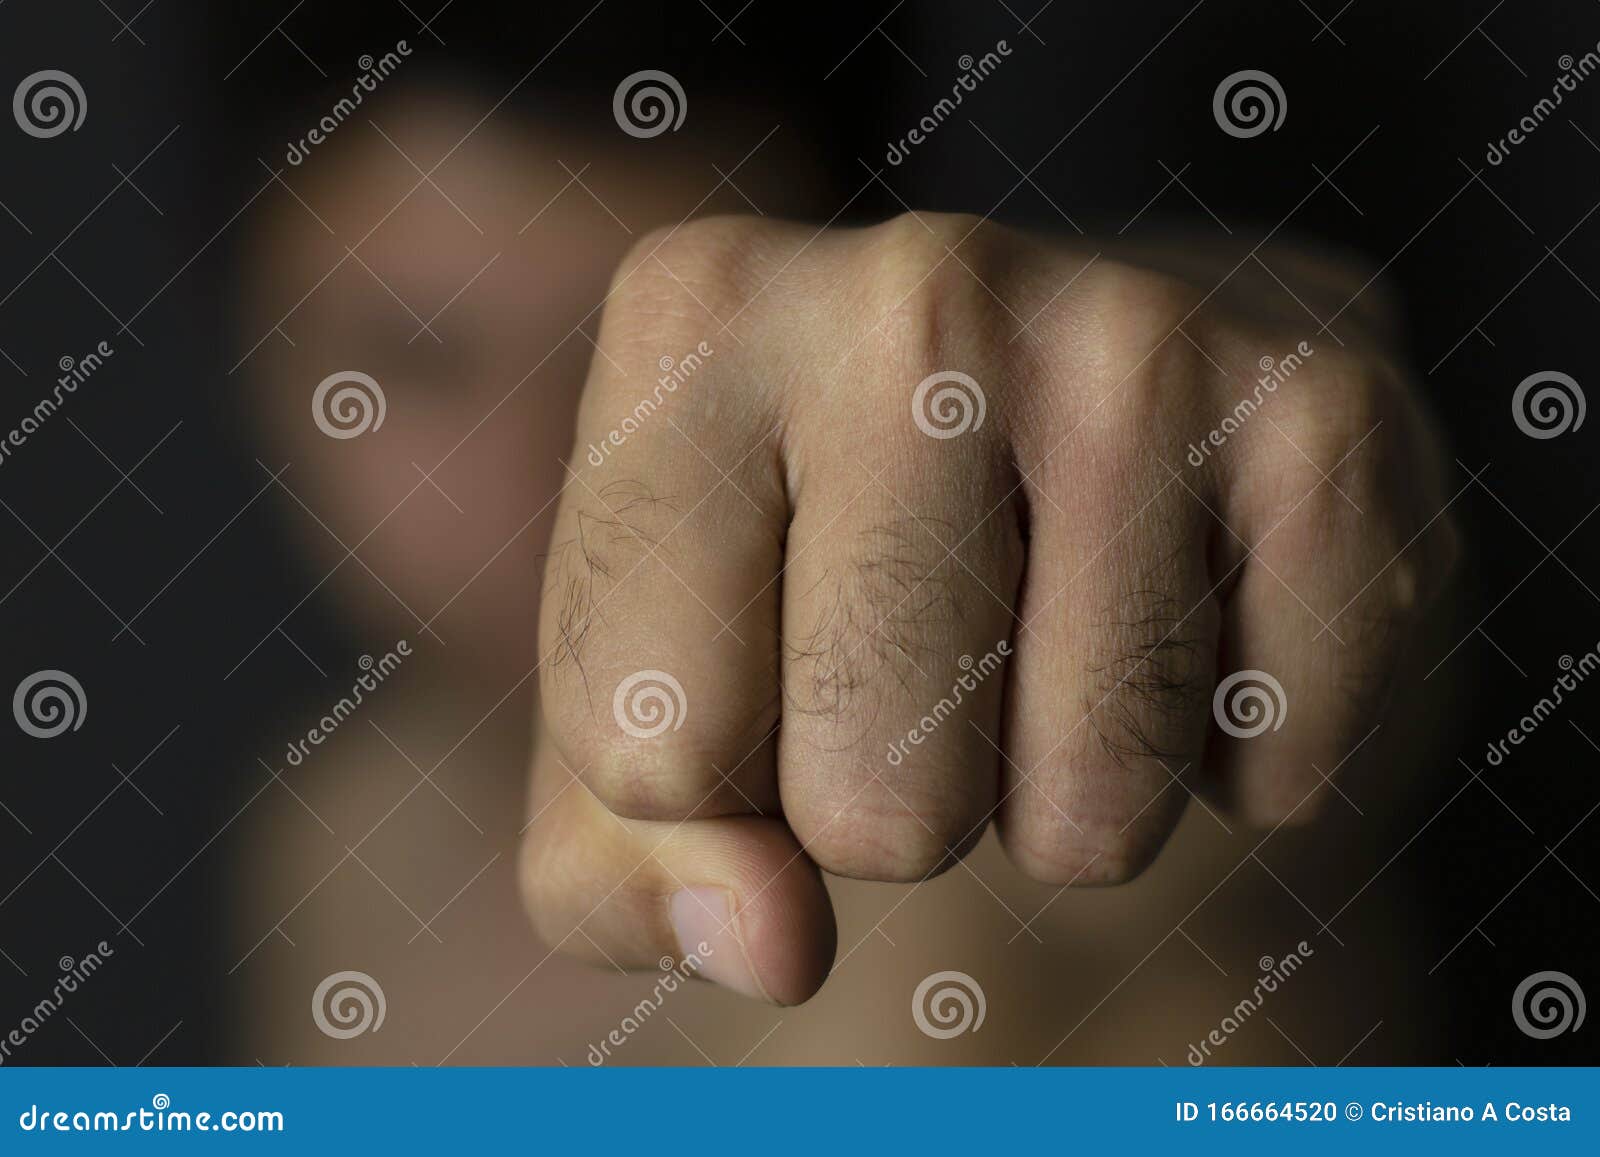 man throwing punch with blurred background